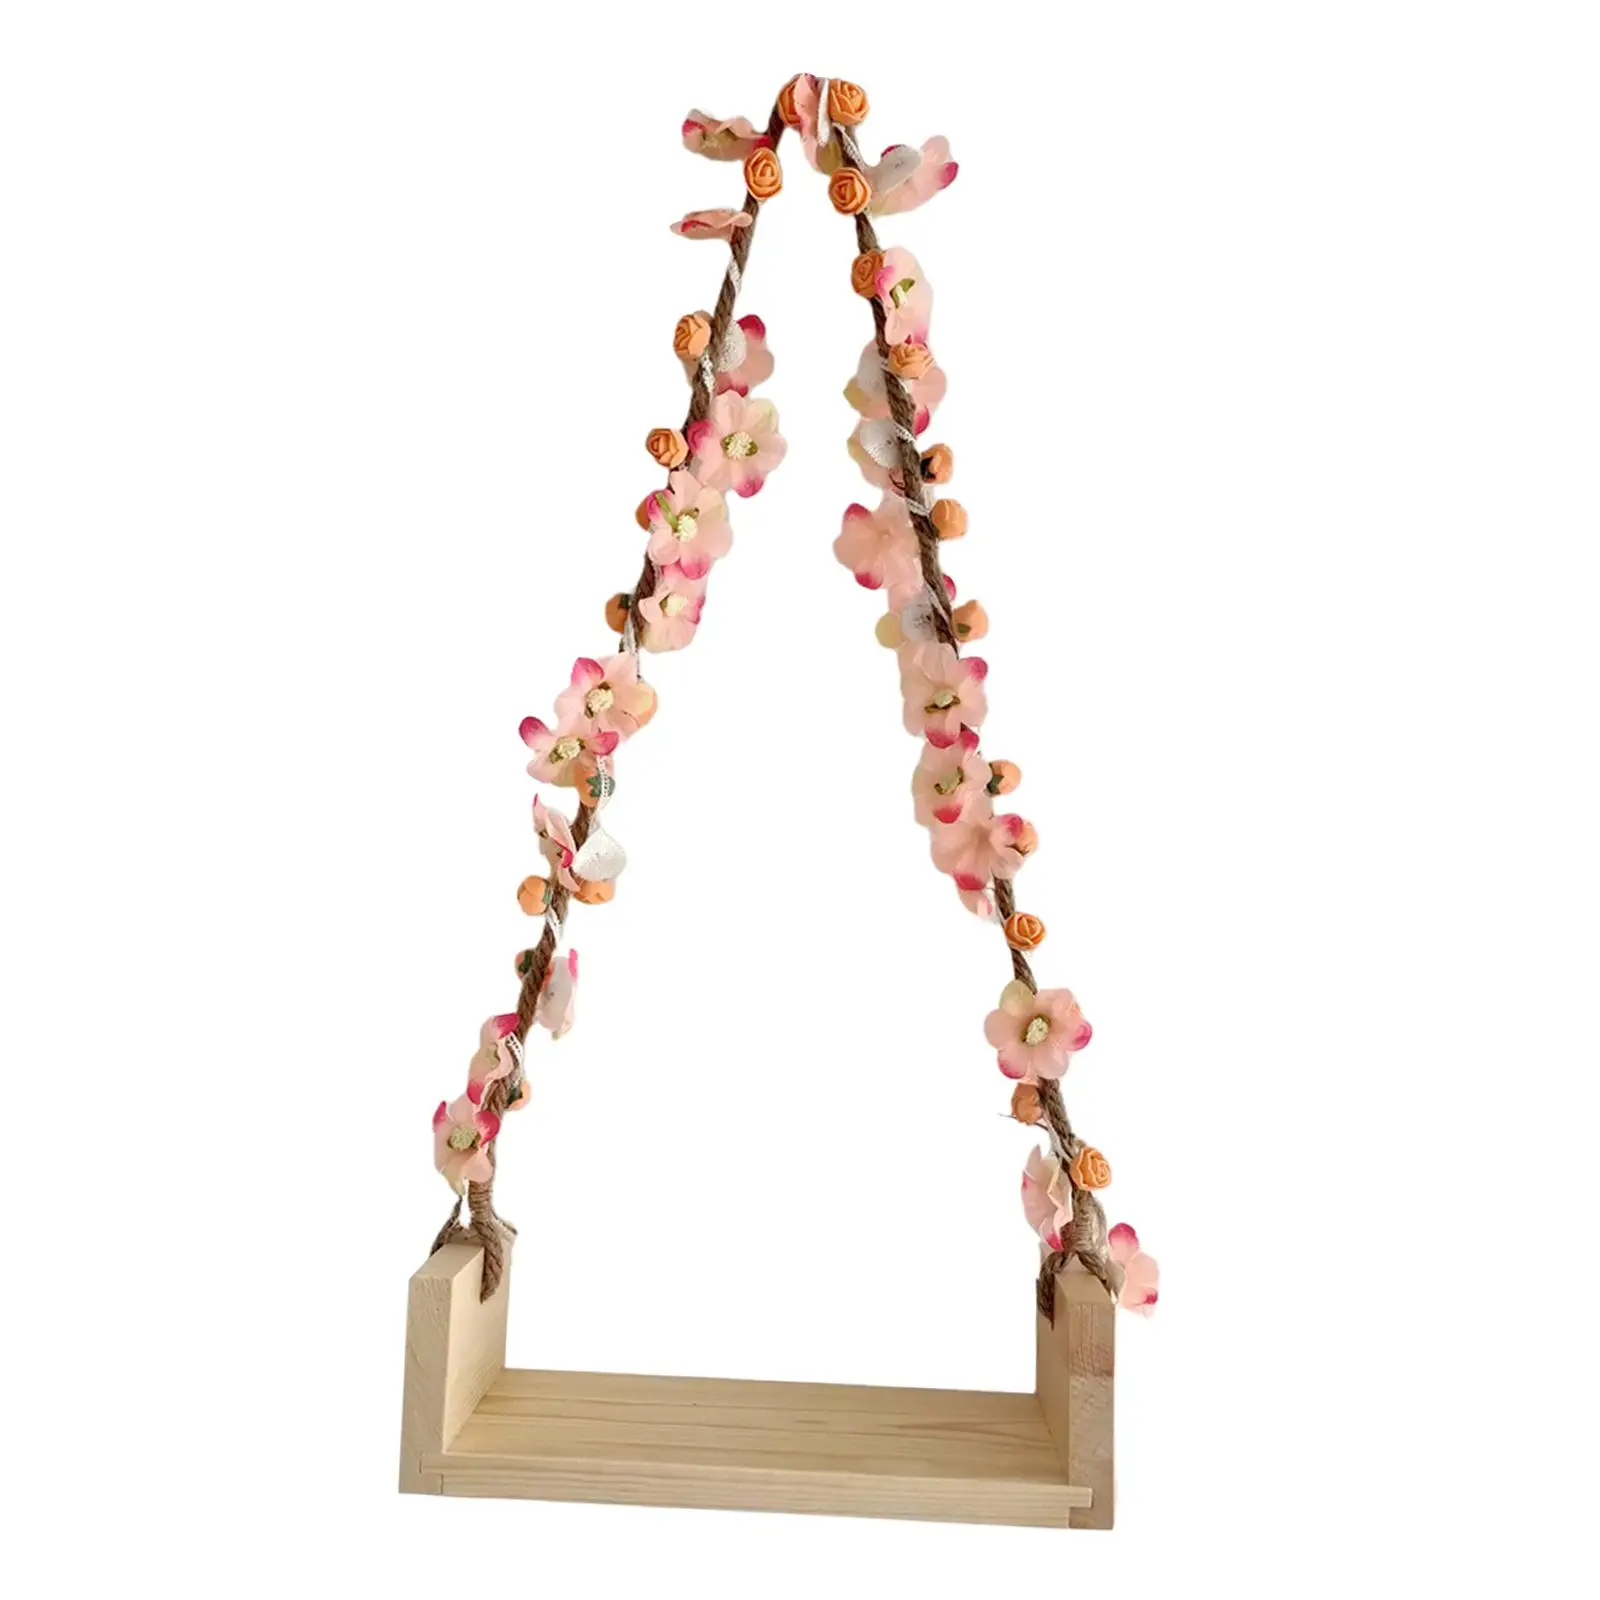 Newborn Photography Props Wooden Swing Seats Photo Posing Aid for Boys Girls